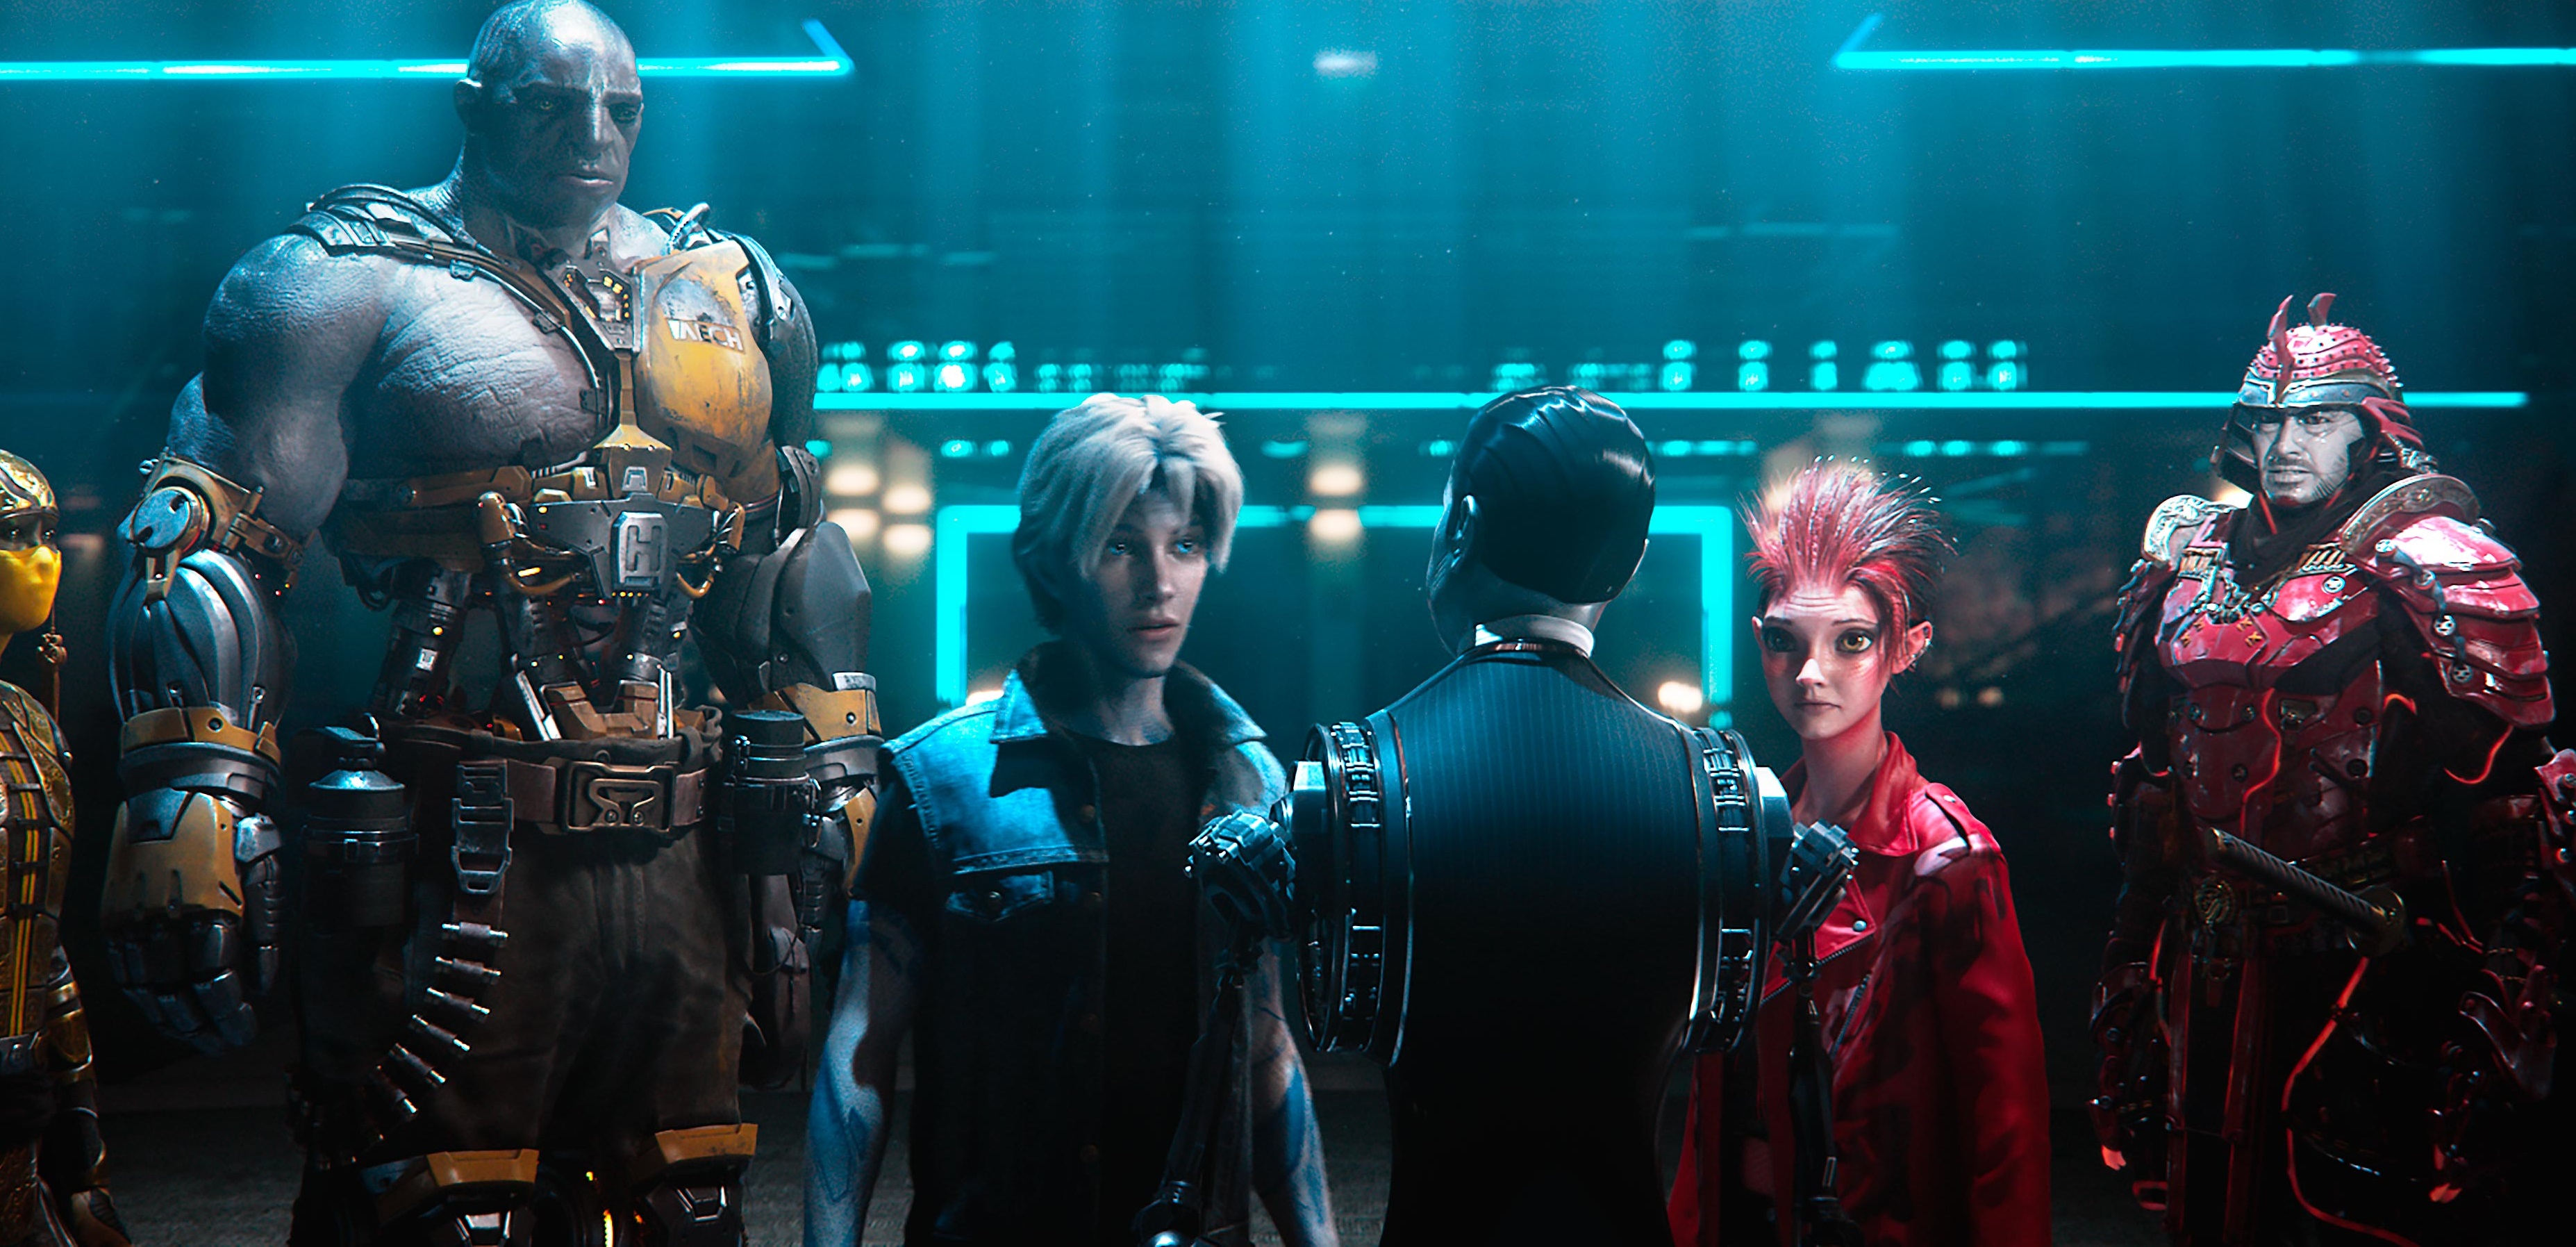 The 6 Best Musical Moments of 'Ready Player One